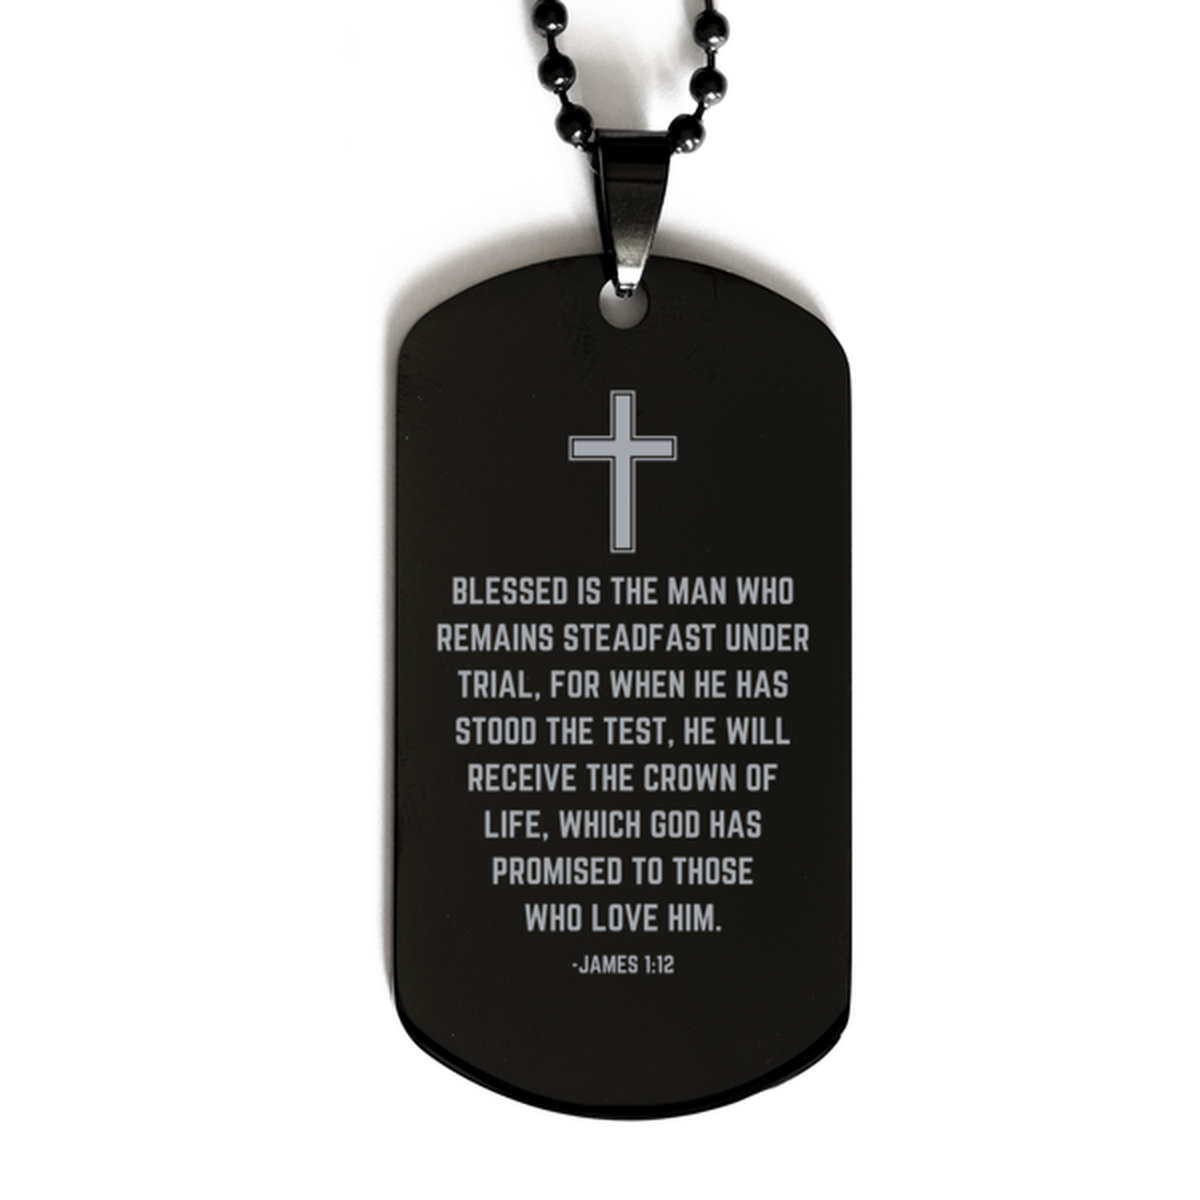 Baptism Gifts For Teenage Boys Girls, Christian Bible Verse Black Dog Tag, Blessed is the man who remains, Confirmation Gifts, Bible Verse Necklace for Son, Godson, Grandson, Nephew